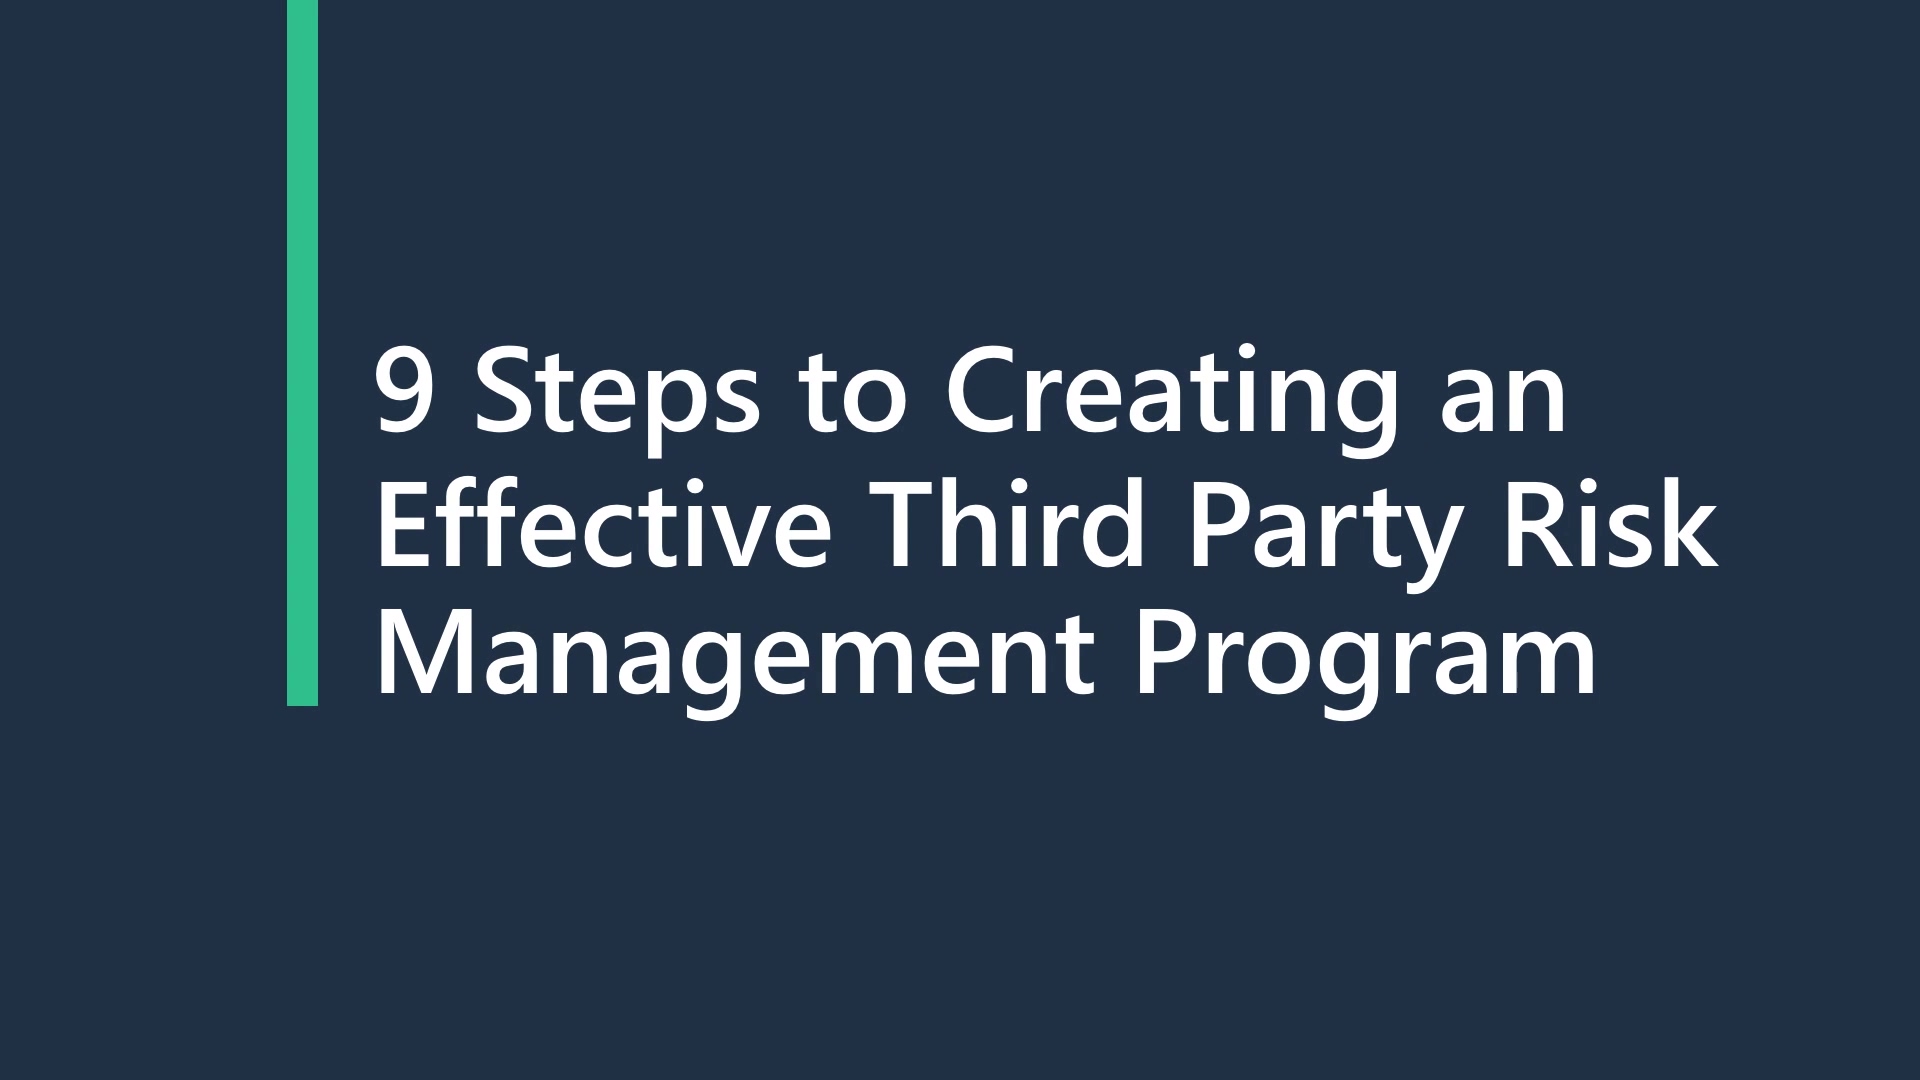 9 Steps to Creating an Effective 3rd Party Risk Program - Final